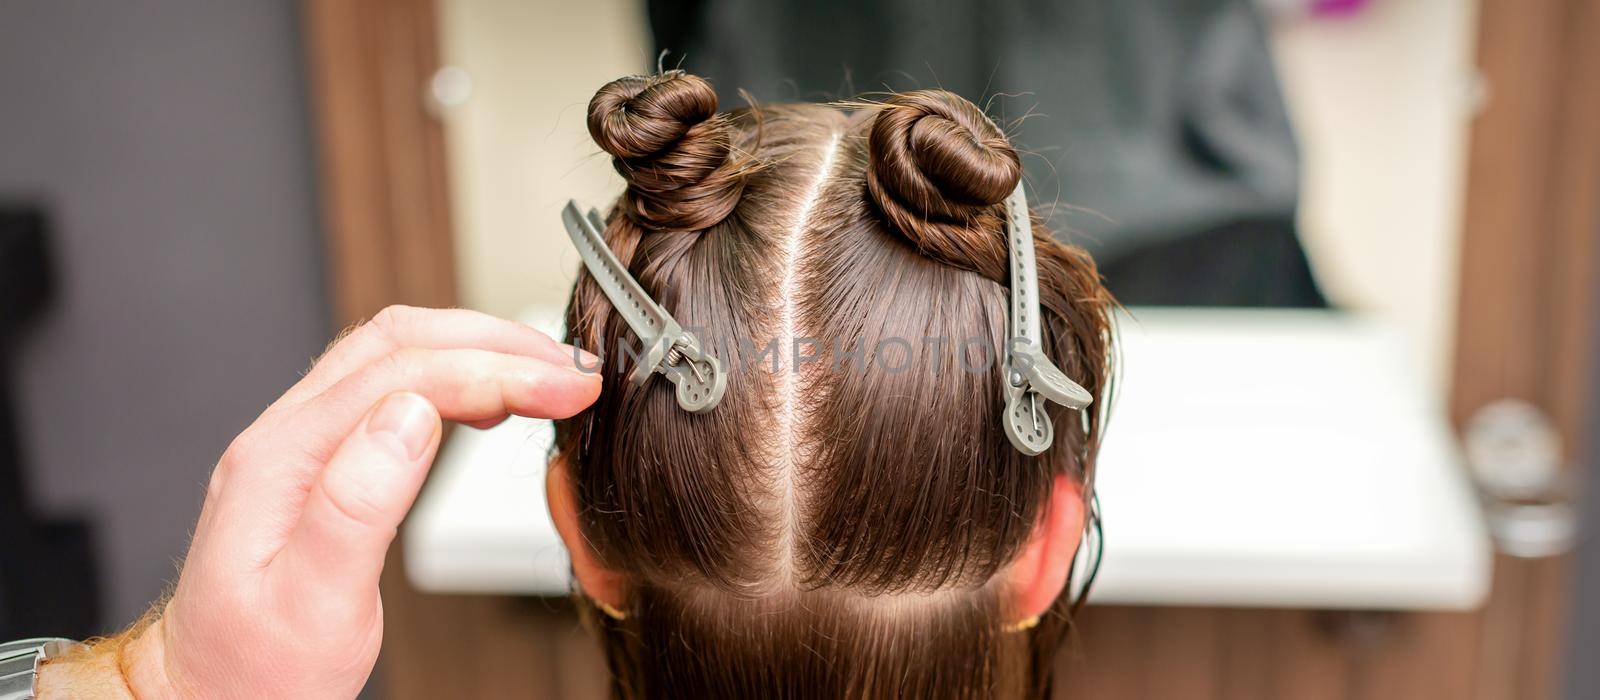 Rear view of hand of hairdresser doing haircut of young woman with hair clips on her hair in hair salon